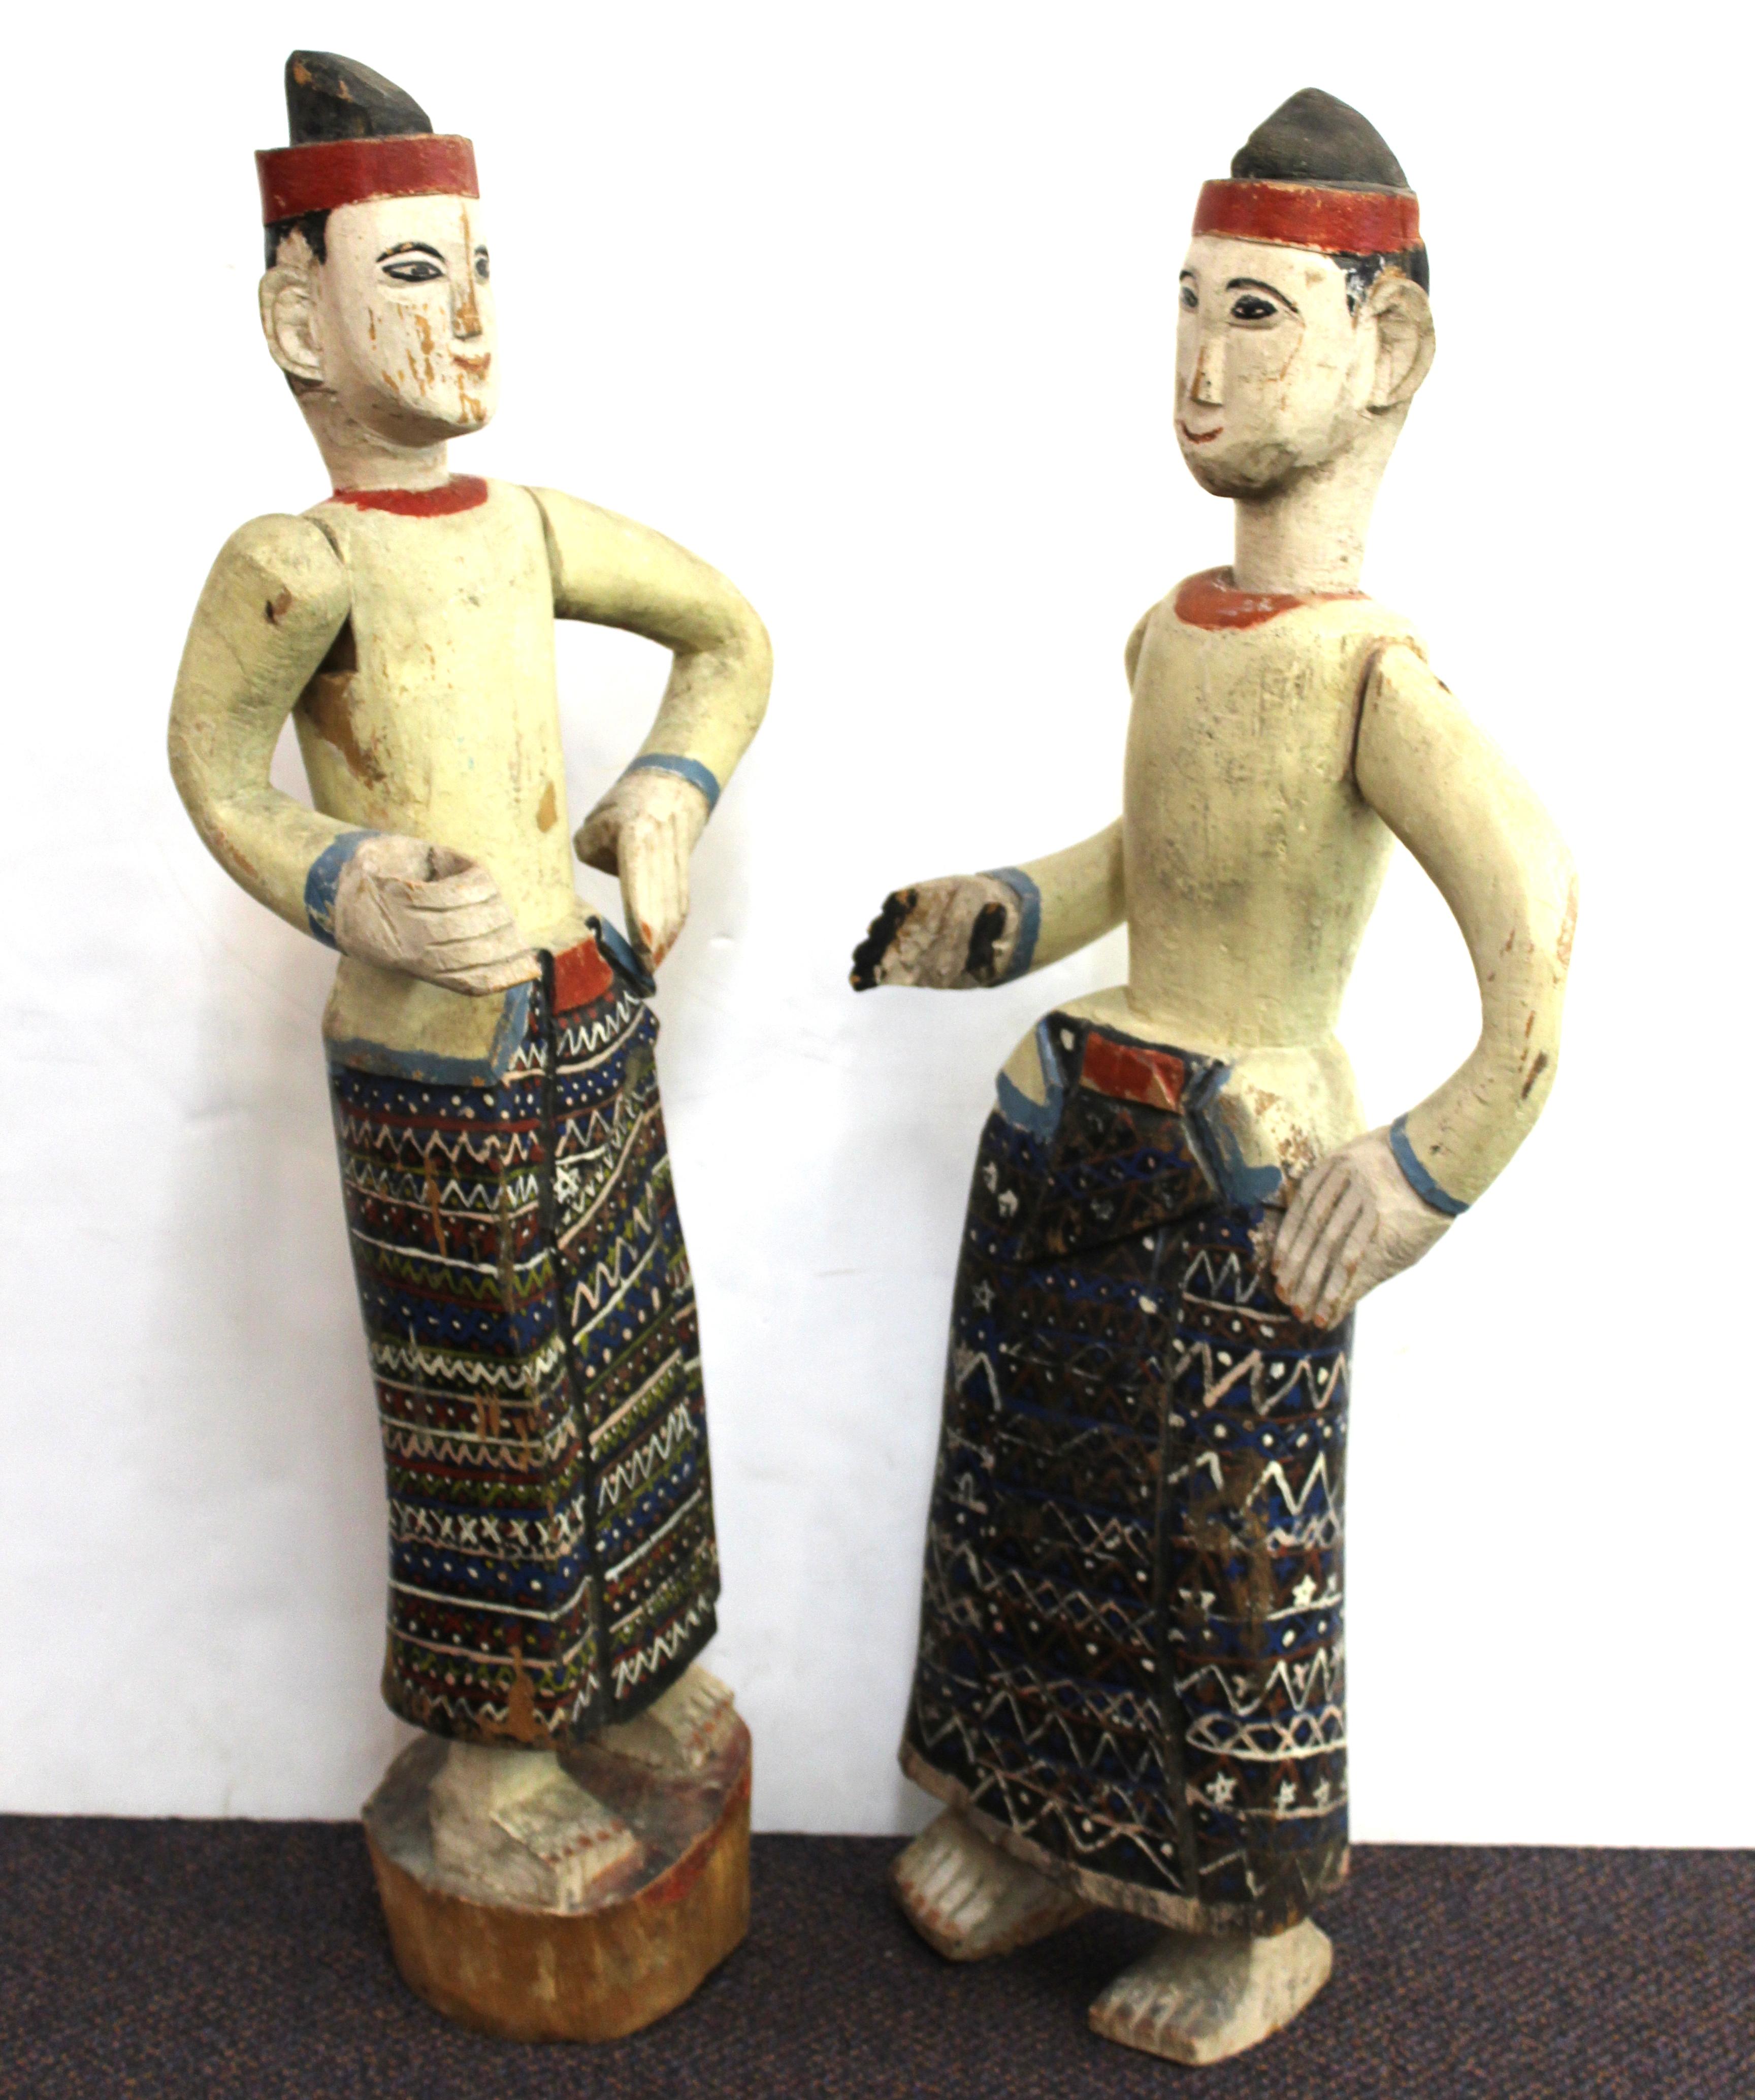 Tribal South-East Asian Carved and Painted Wood Figures of Men in Sarongs